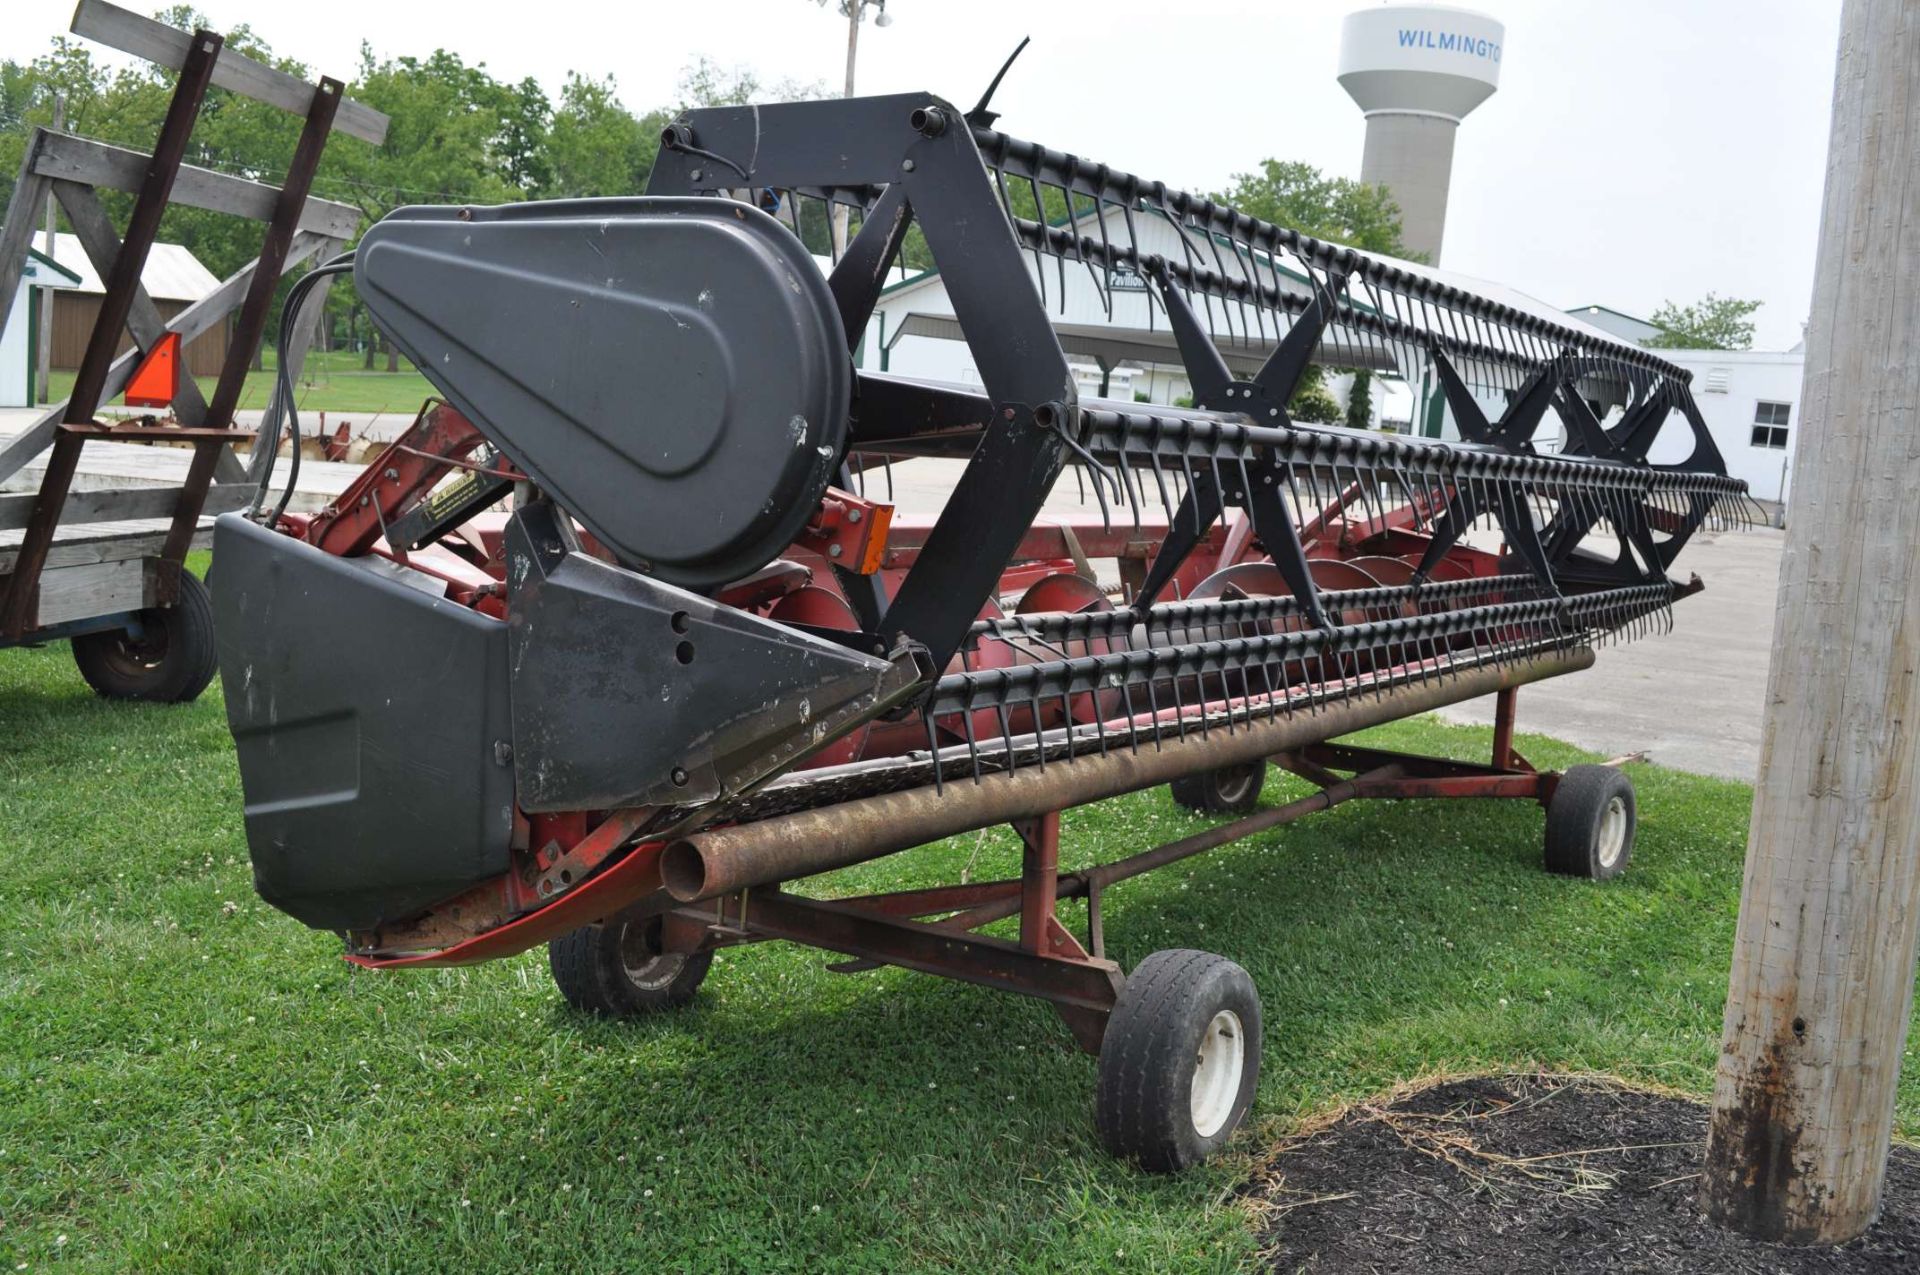 20' Case IH 1020 grain head, hyd for/aft, SCH knife, SN JJC0090074, sells with header cart - Image 4 of 8